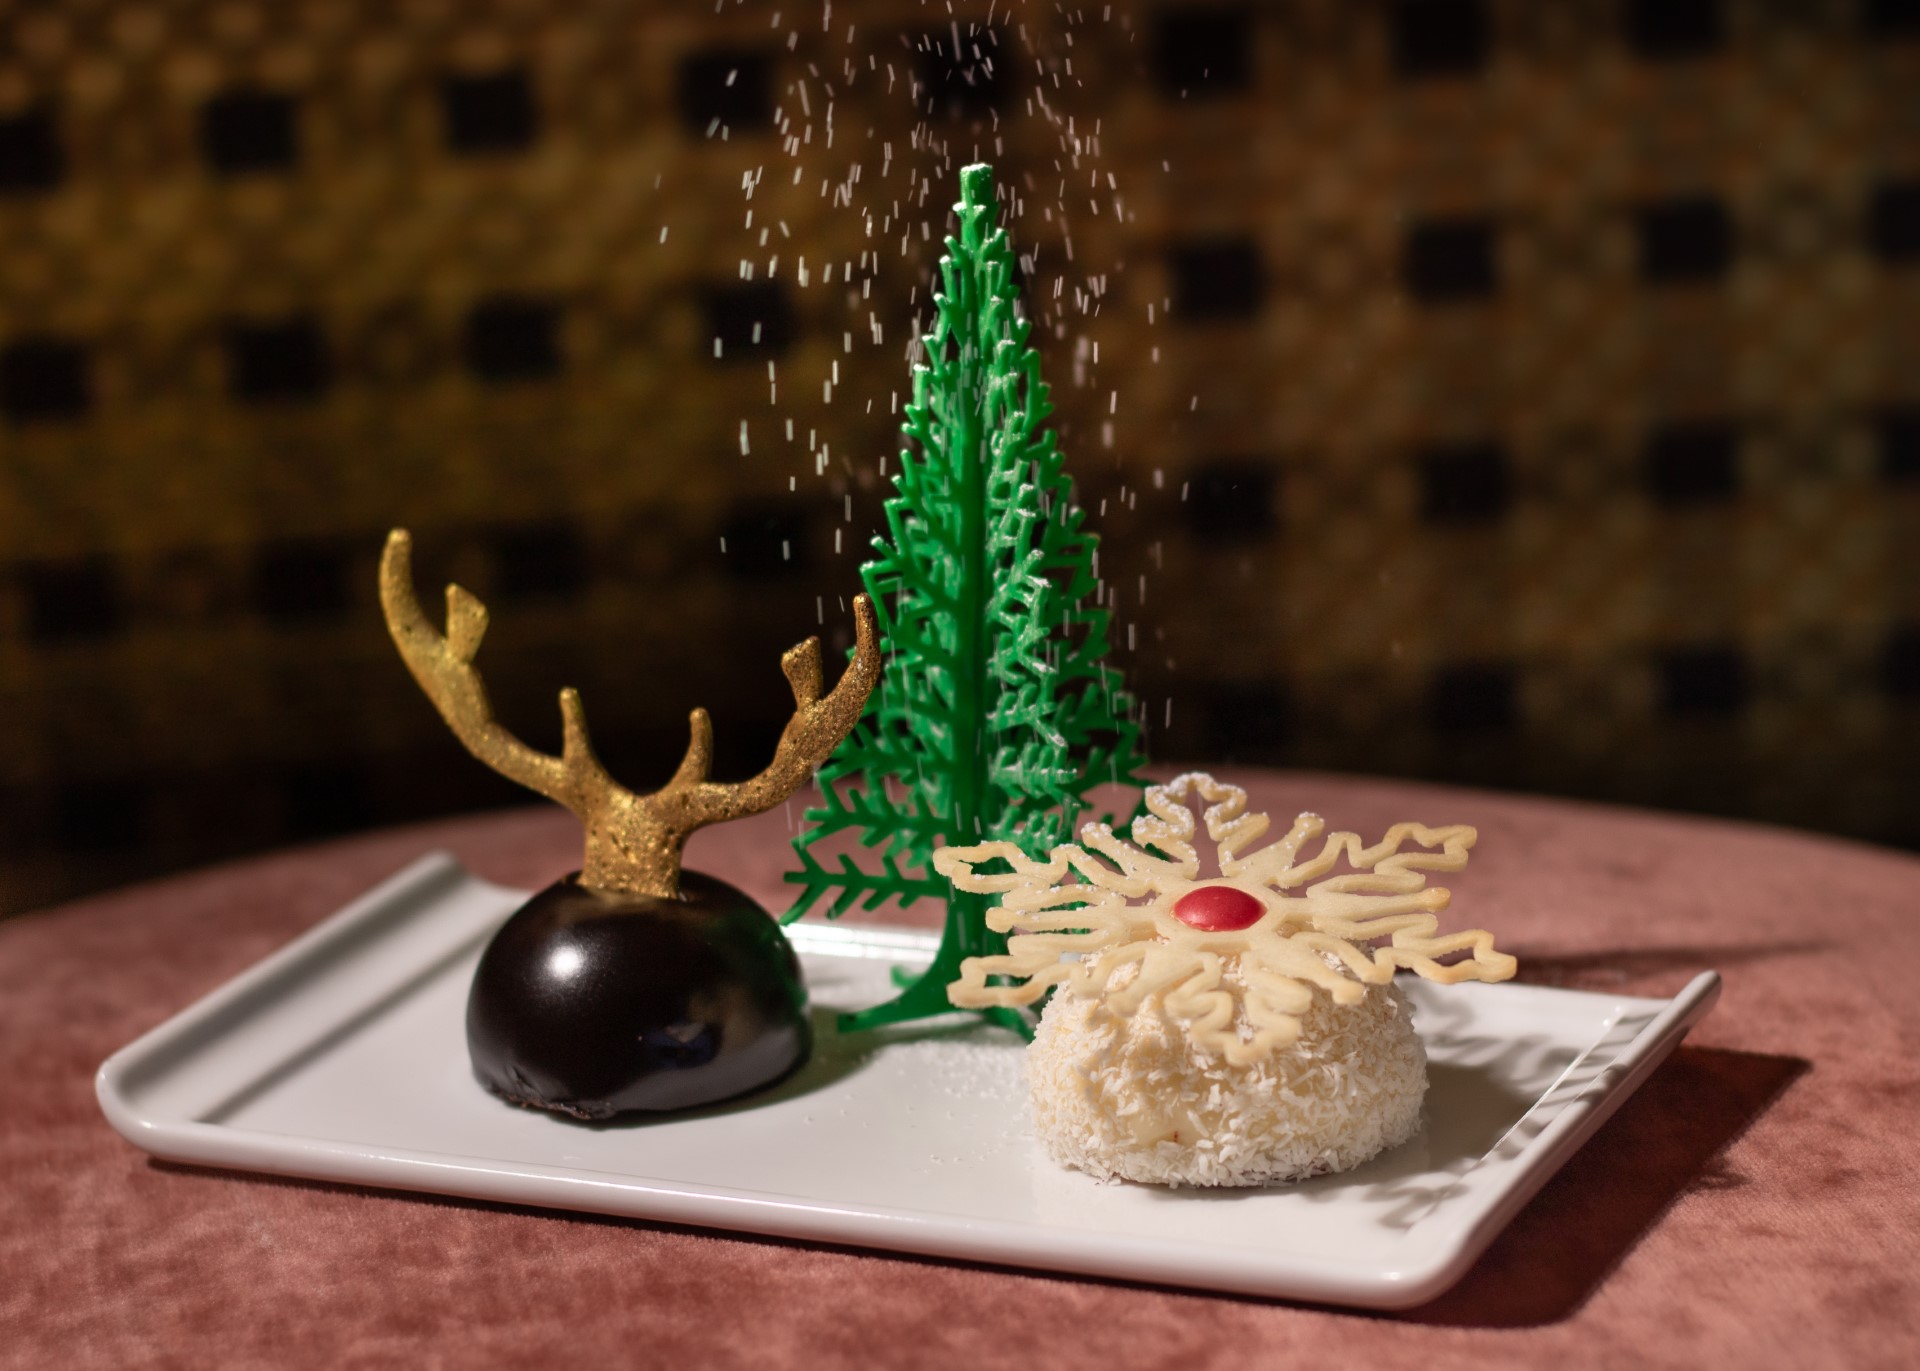 Amrina’s Winter Wonderland dessert features a chocolate cherry mousse cake topped with golden antlers, a red velvet cream cheese mouse, and a Christmas tree prop.